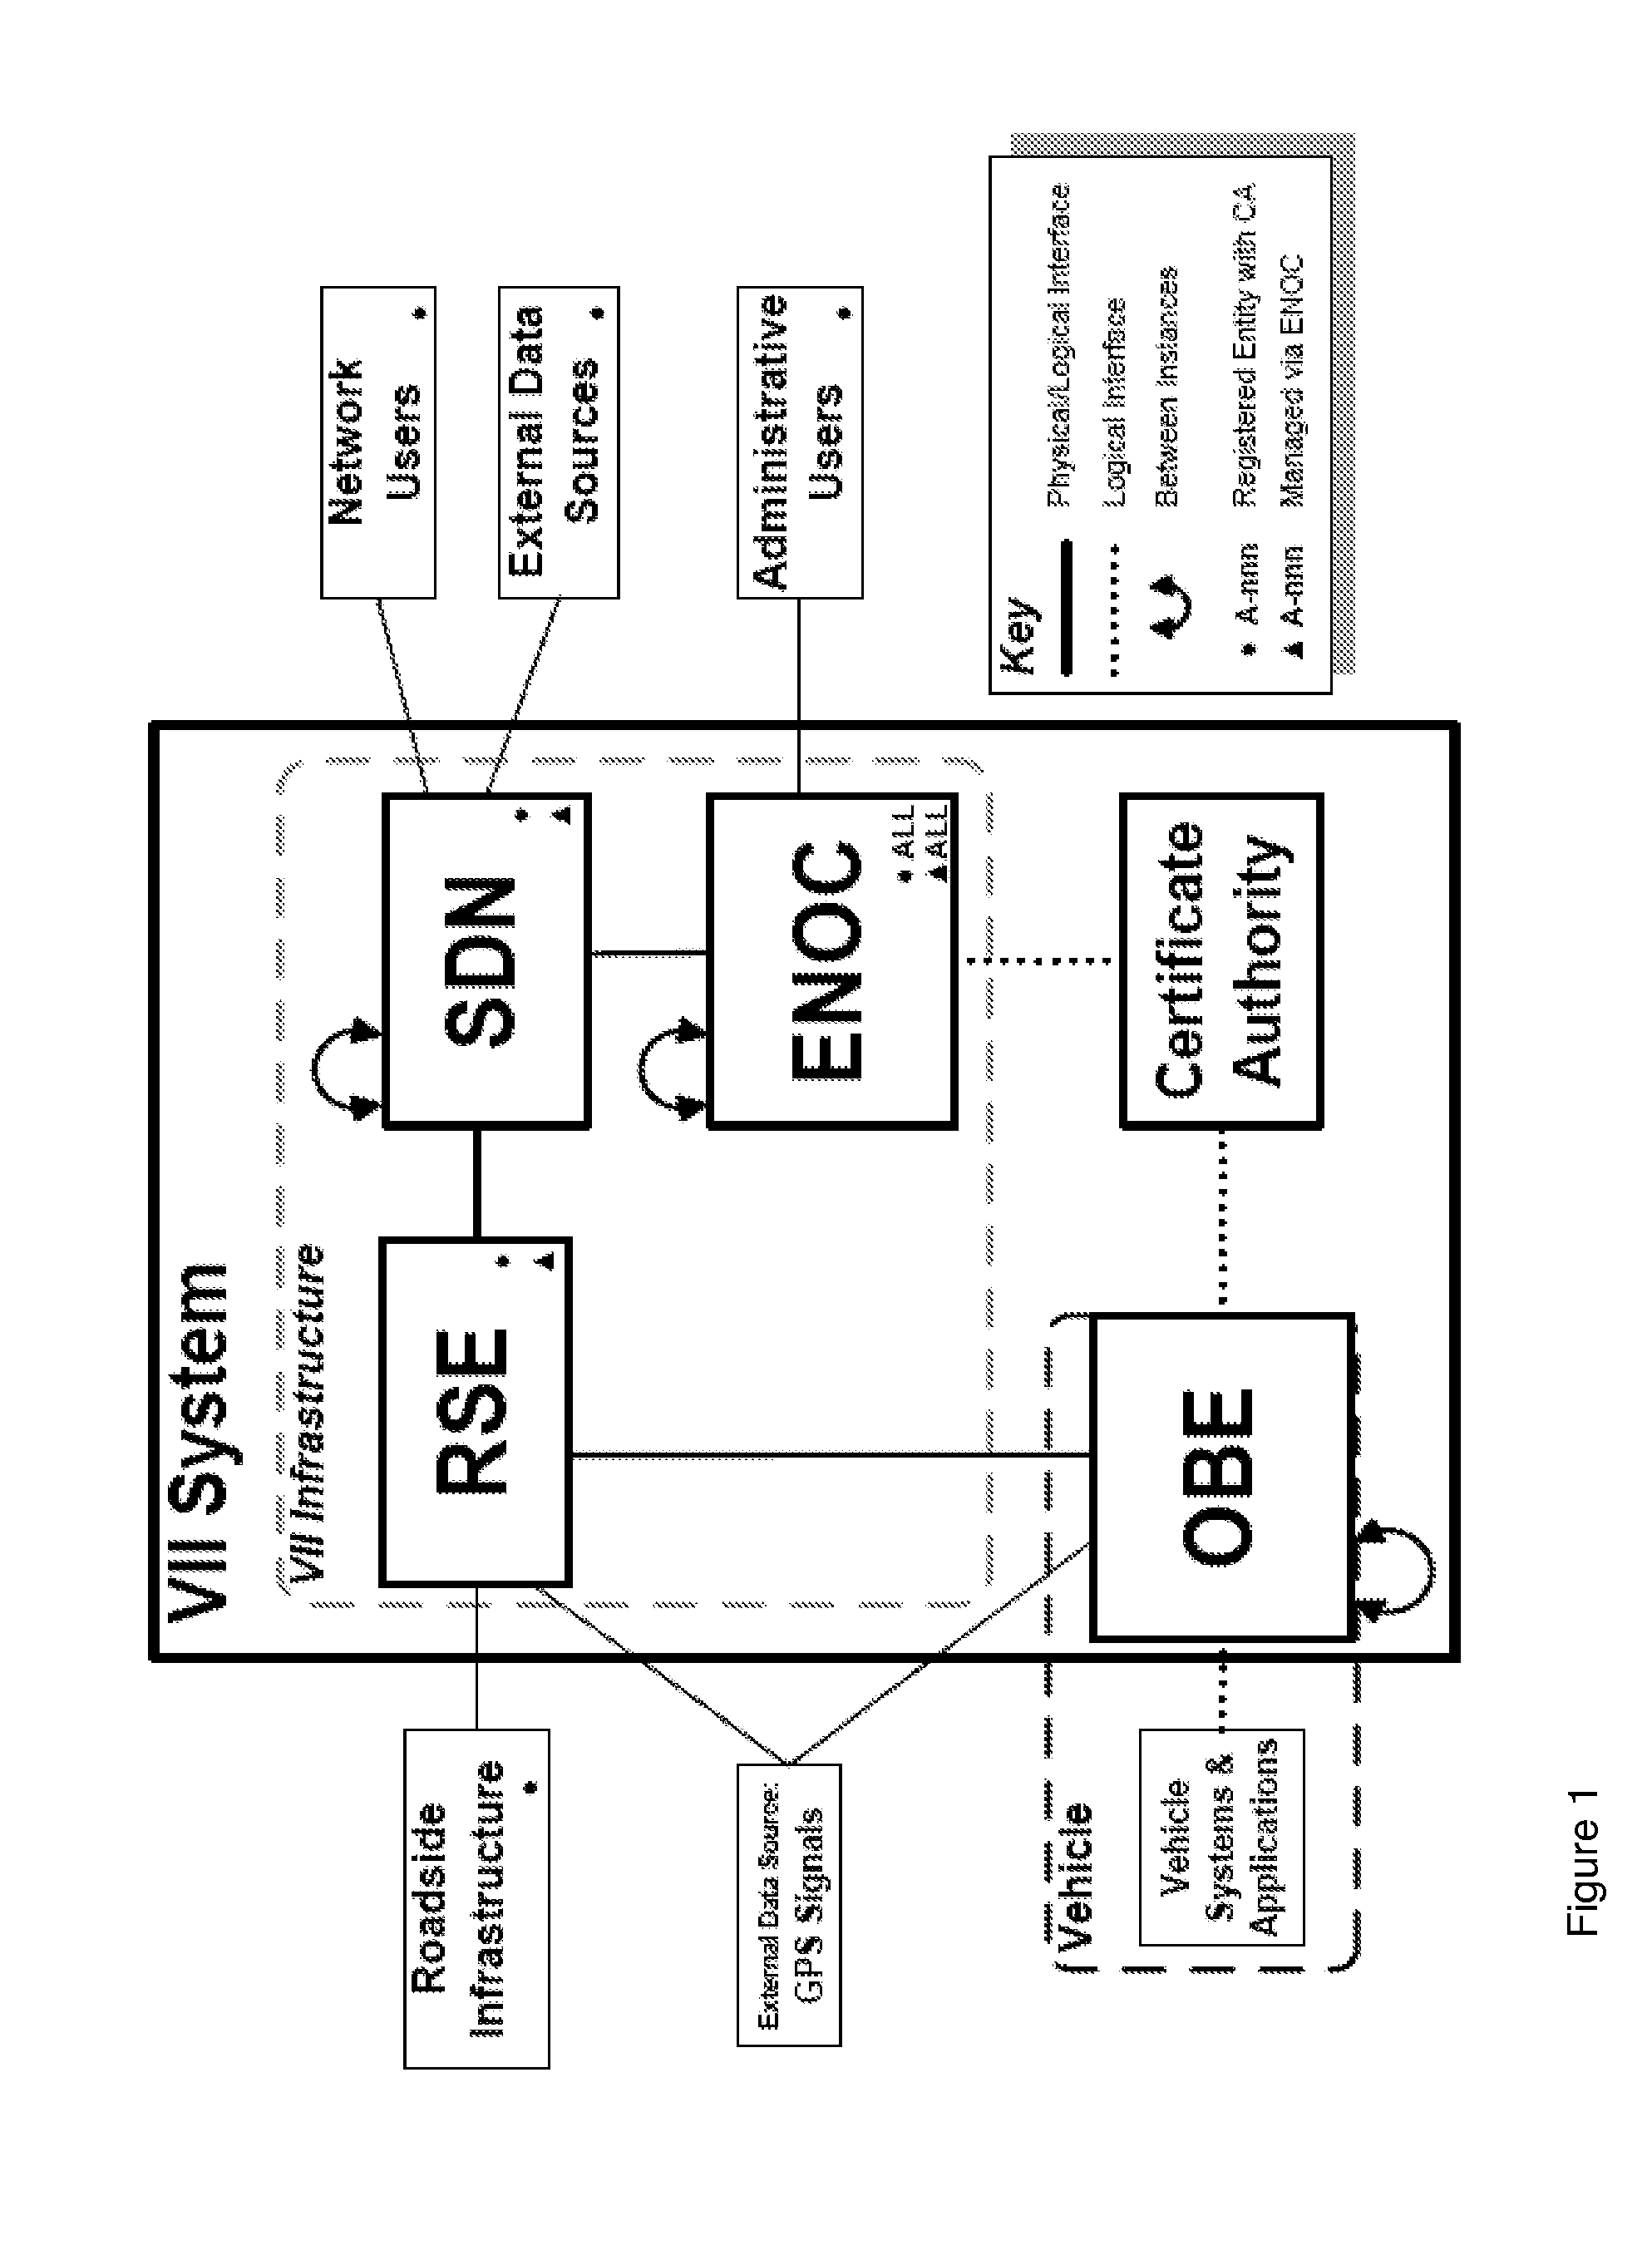 Method and Apparatus for Advanced Intelligent Transportation Systems